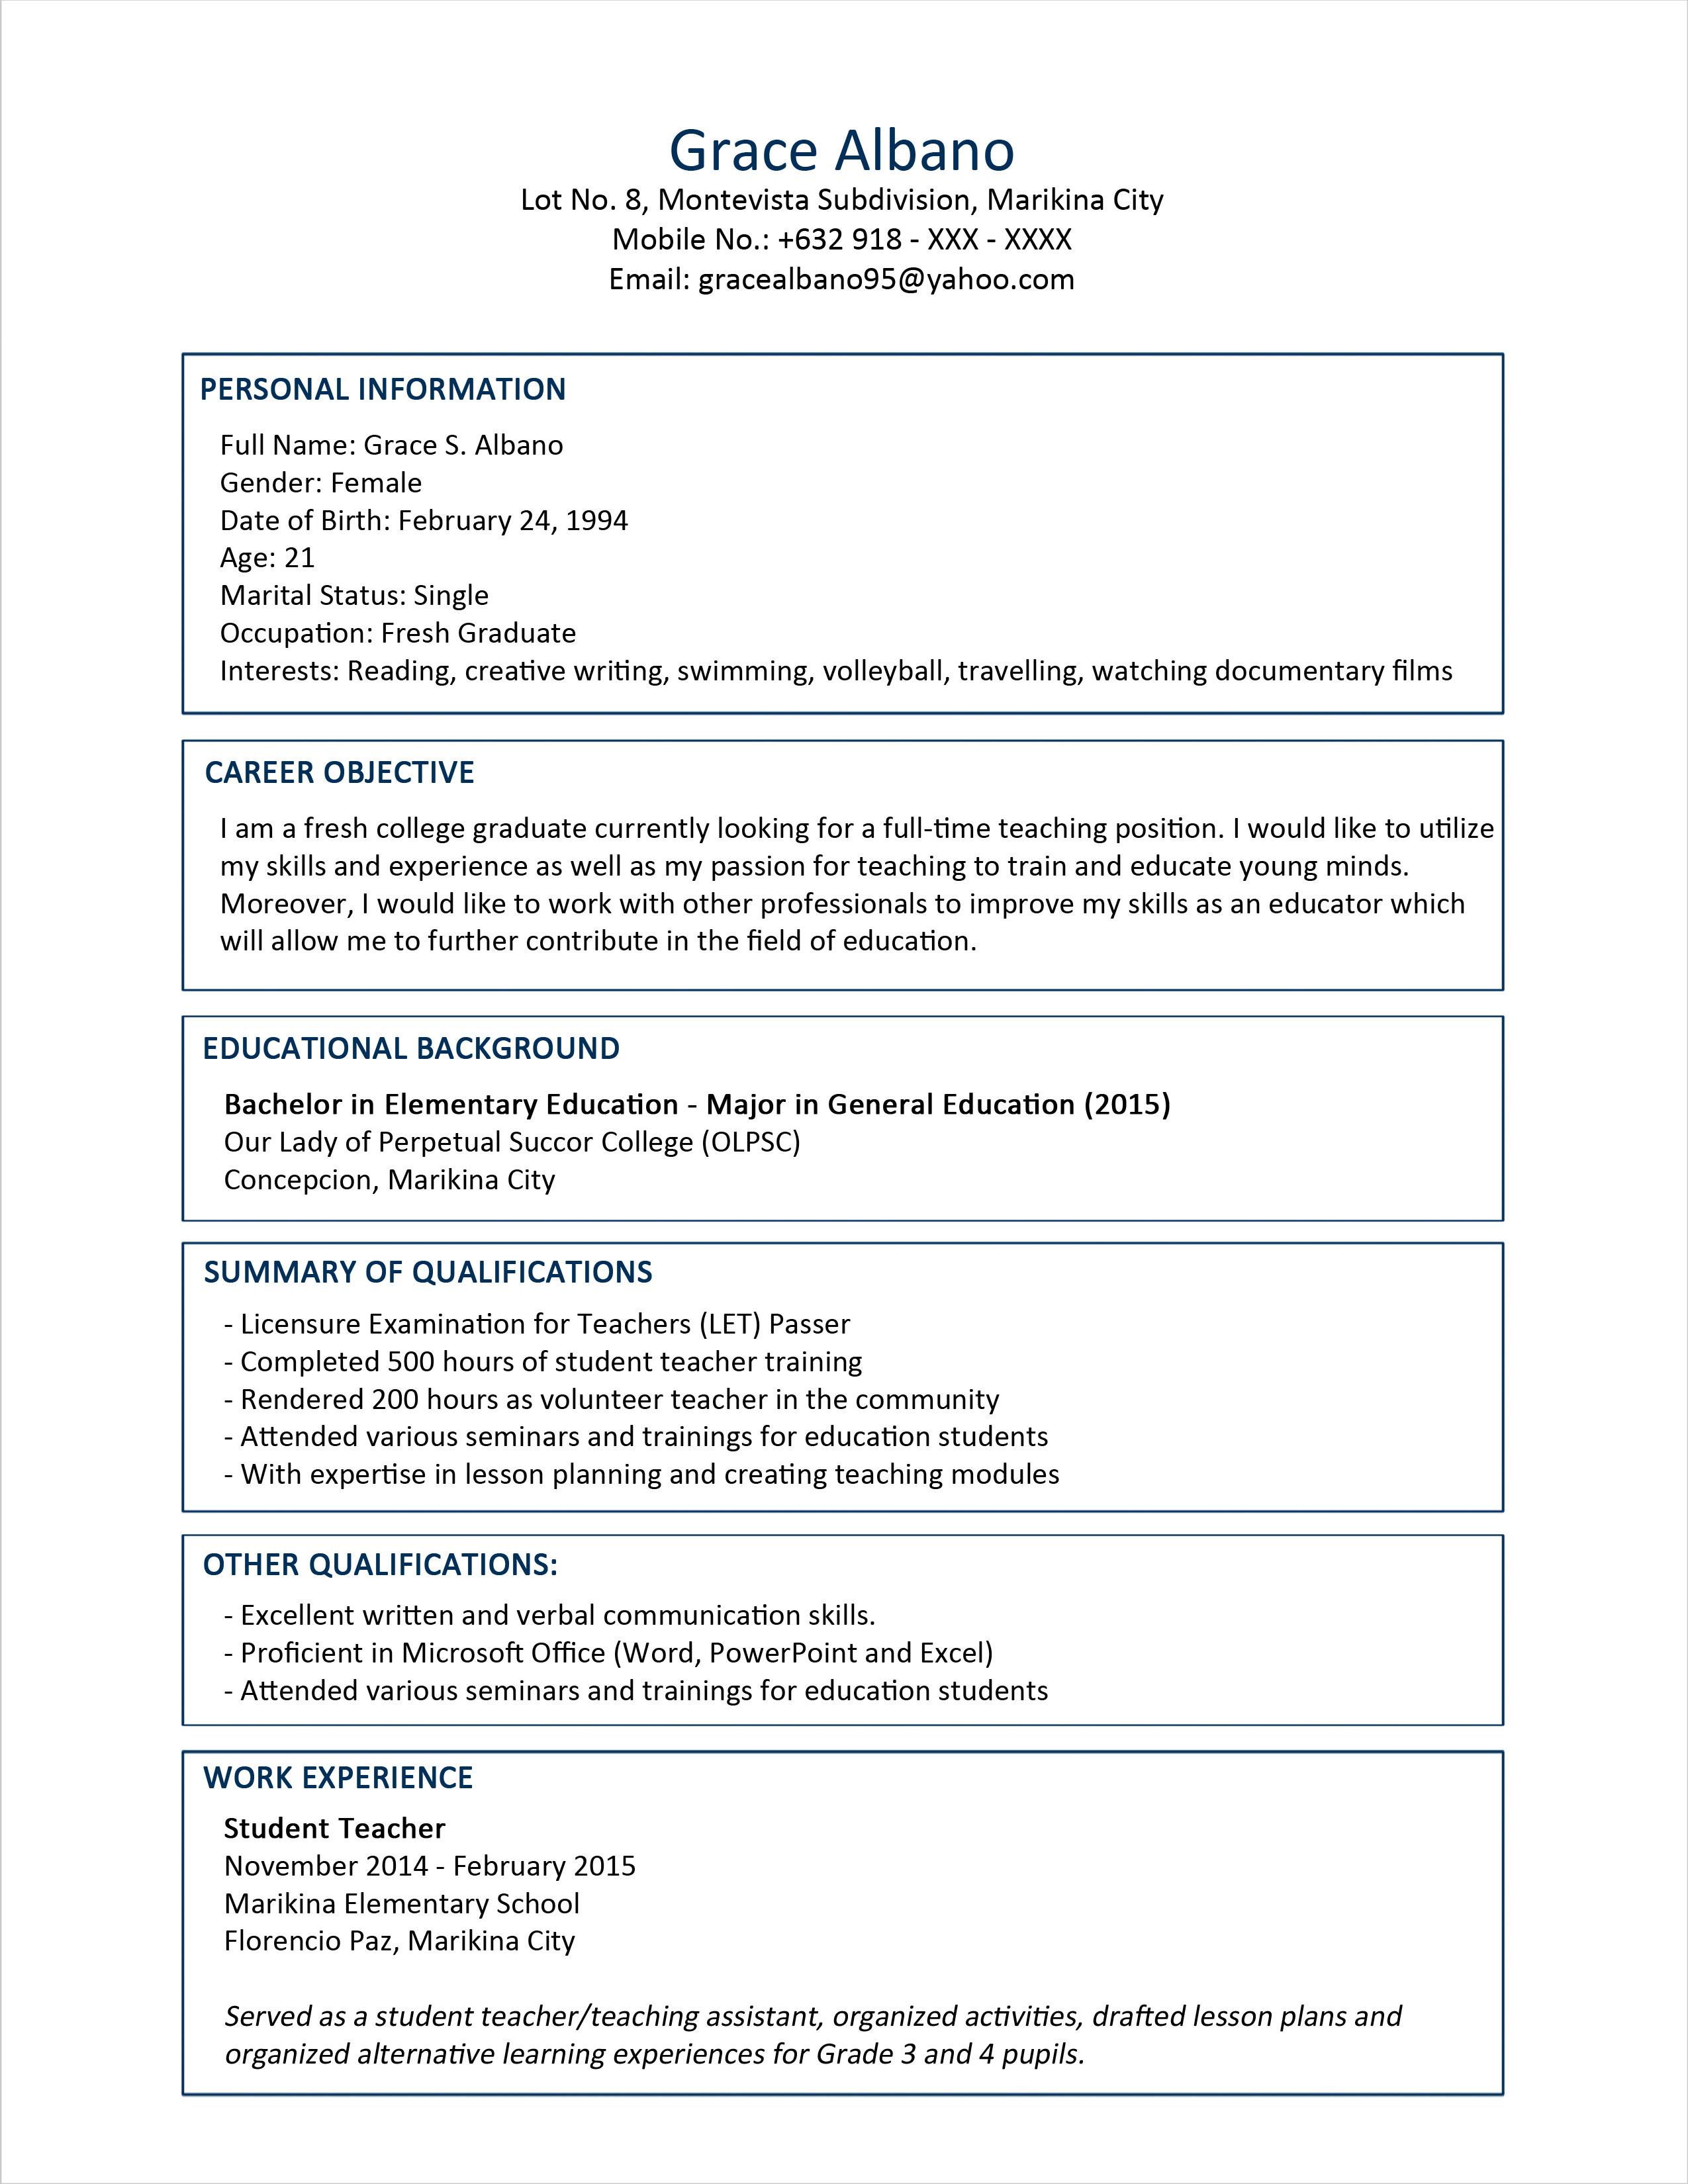 Sample Resume Format for Fresh Graduates Two Page Format